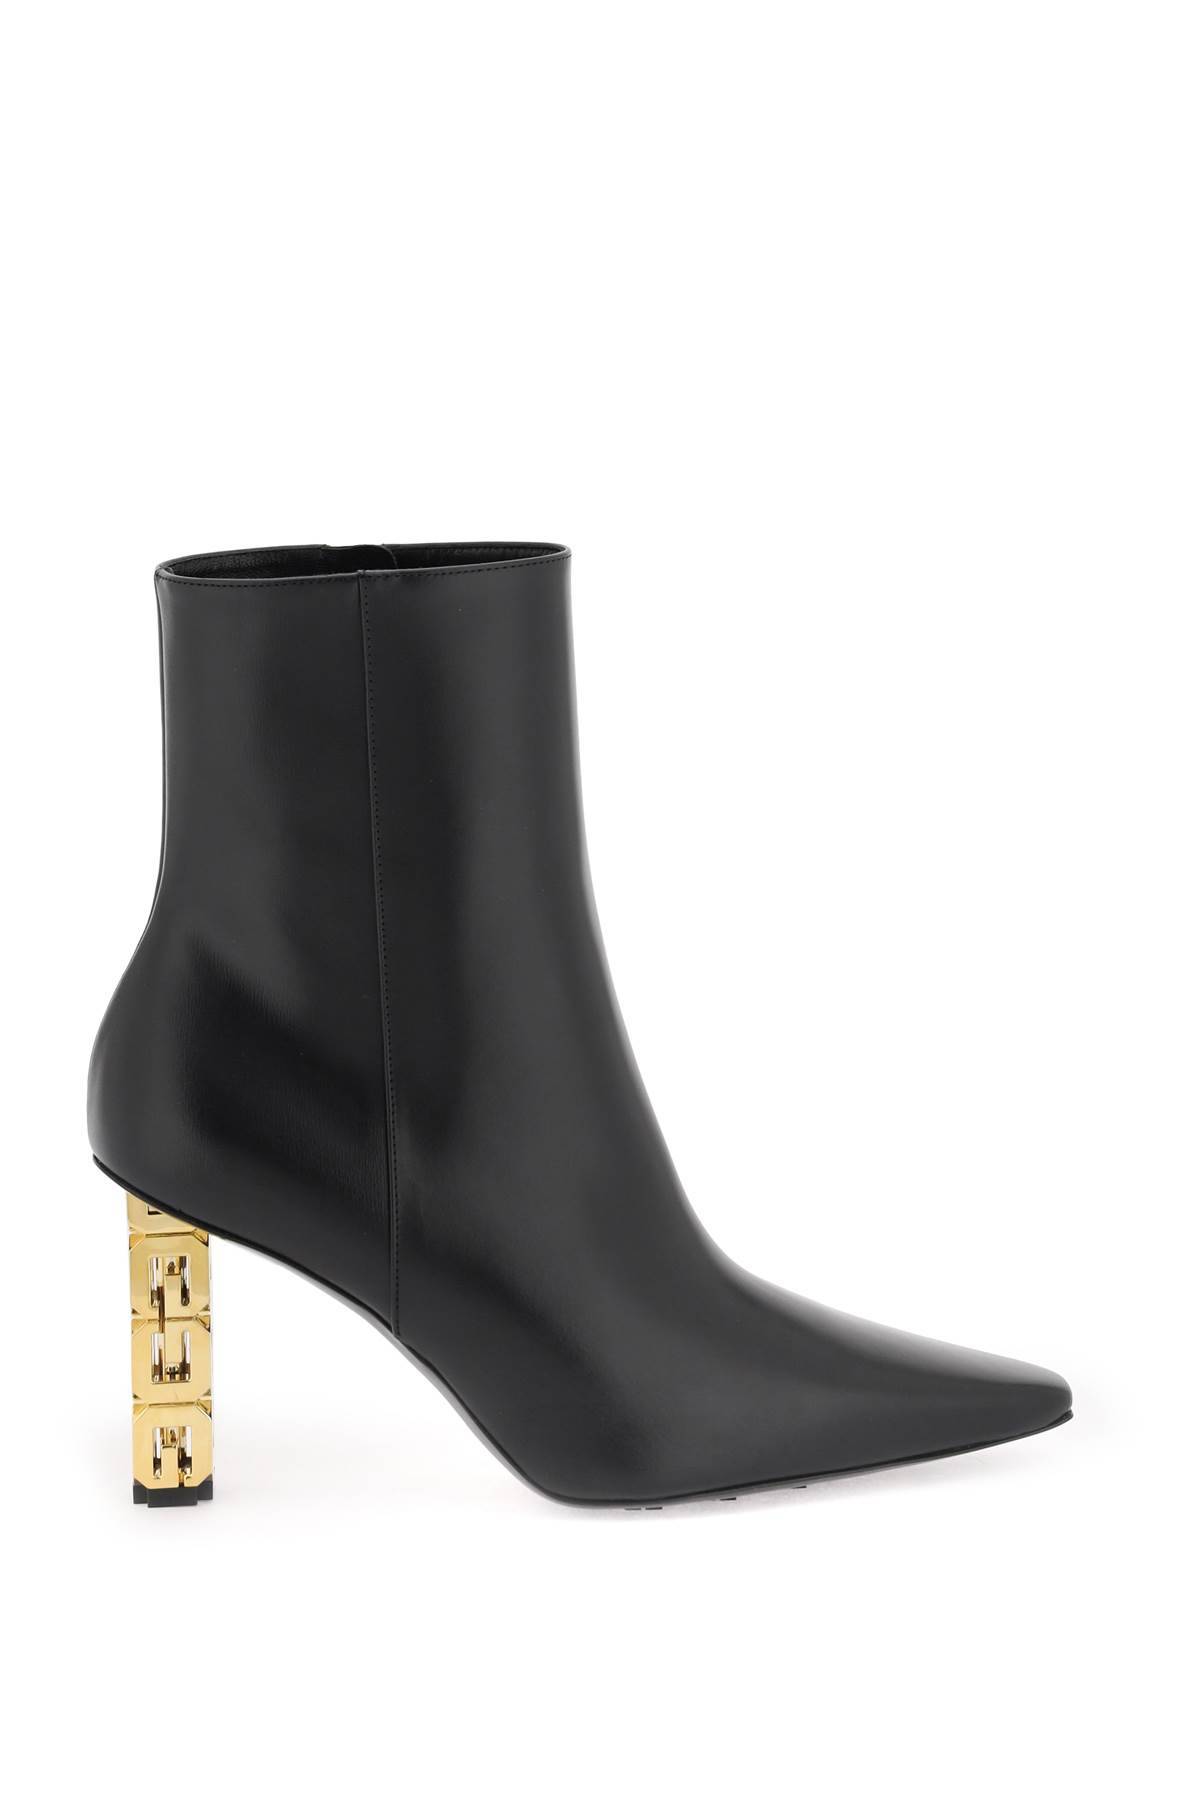 GIVENCHY leather ankle boots with g cube heel